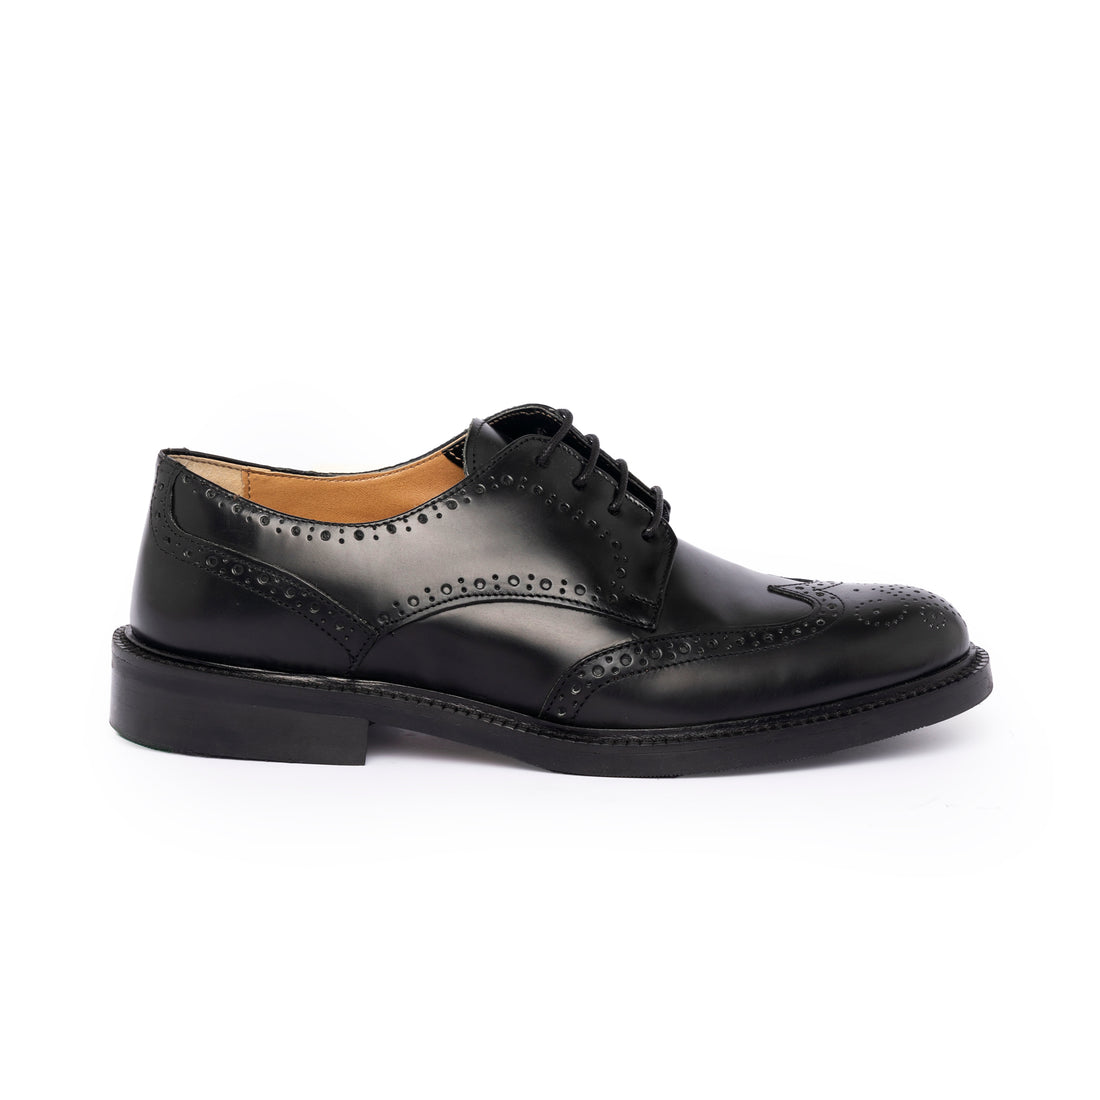 Oxford in abrasive leather